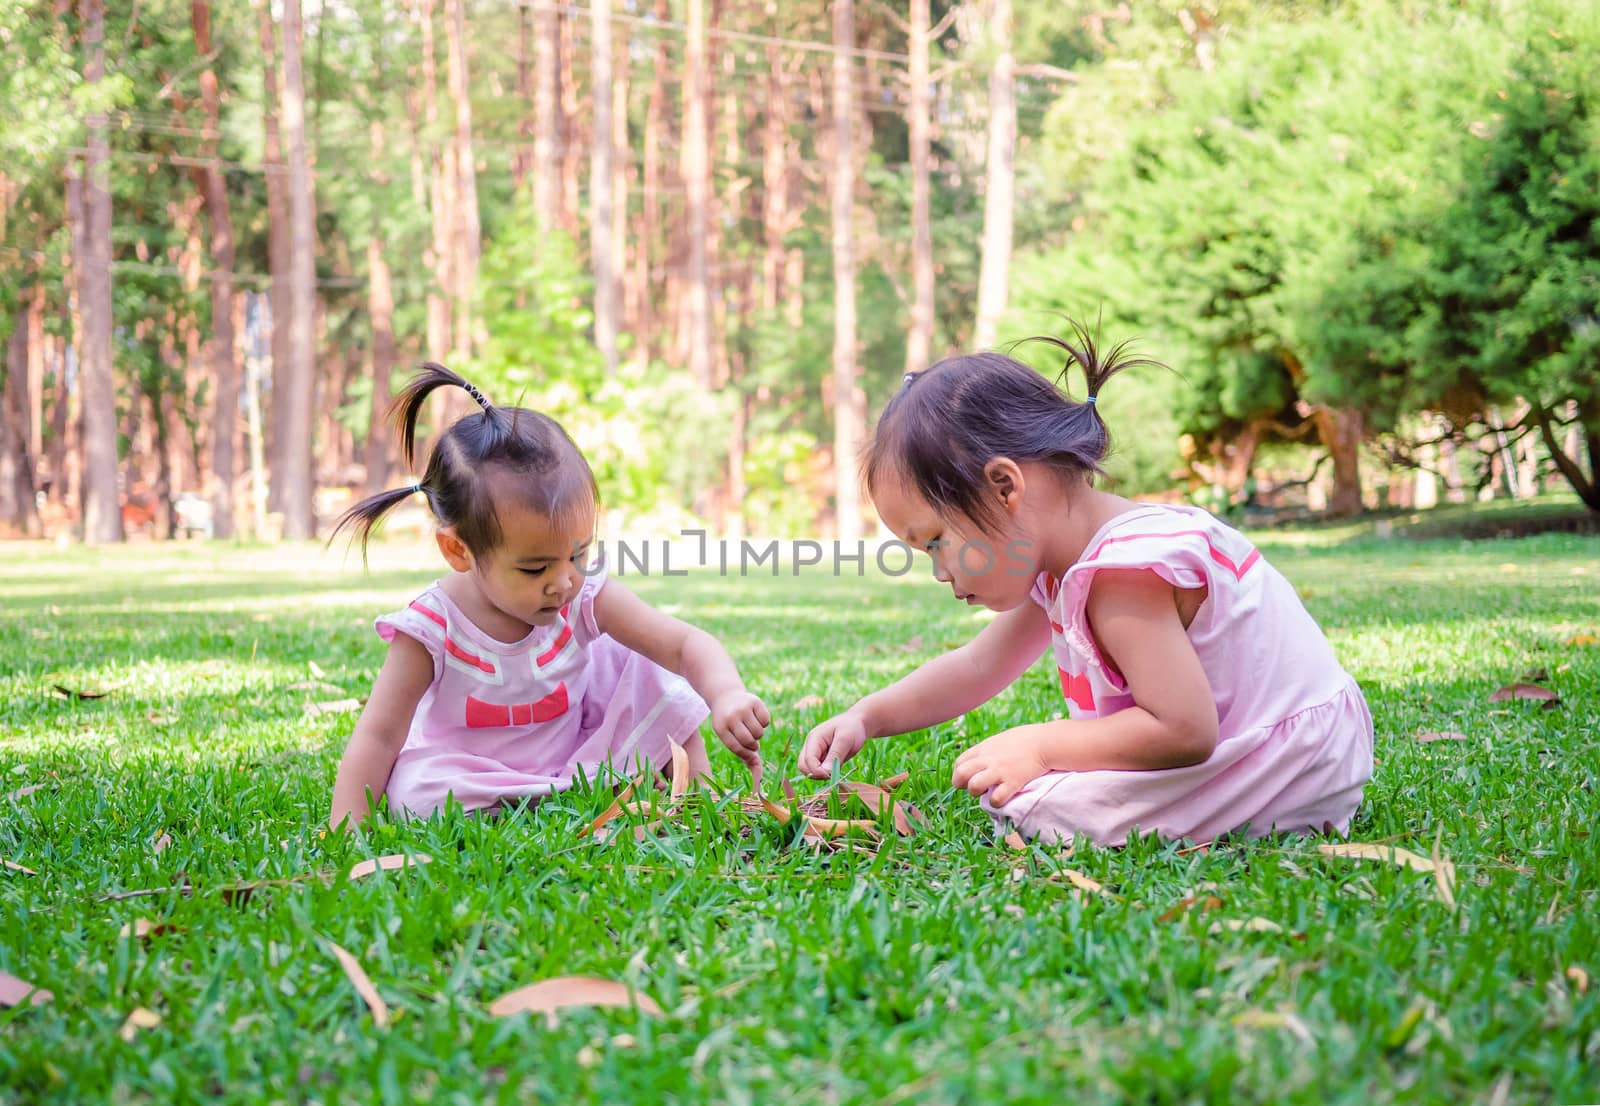 Asian little girls sit playing on grasses together happiness over nature background. Playing is learning for children. by TEERASAK